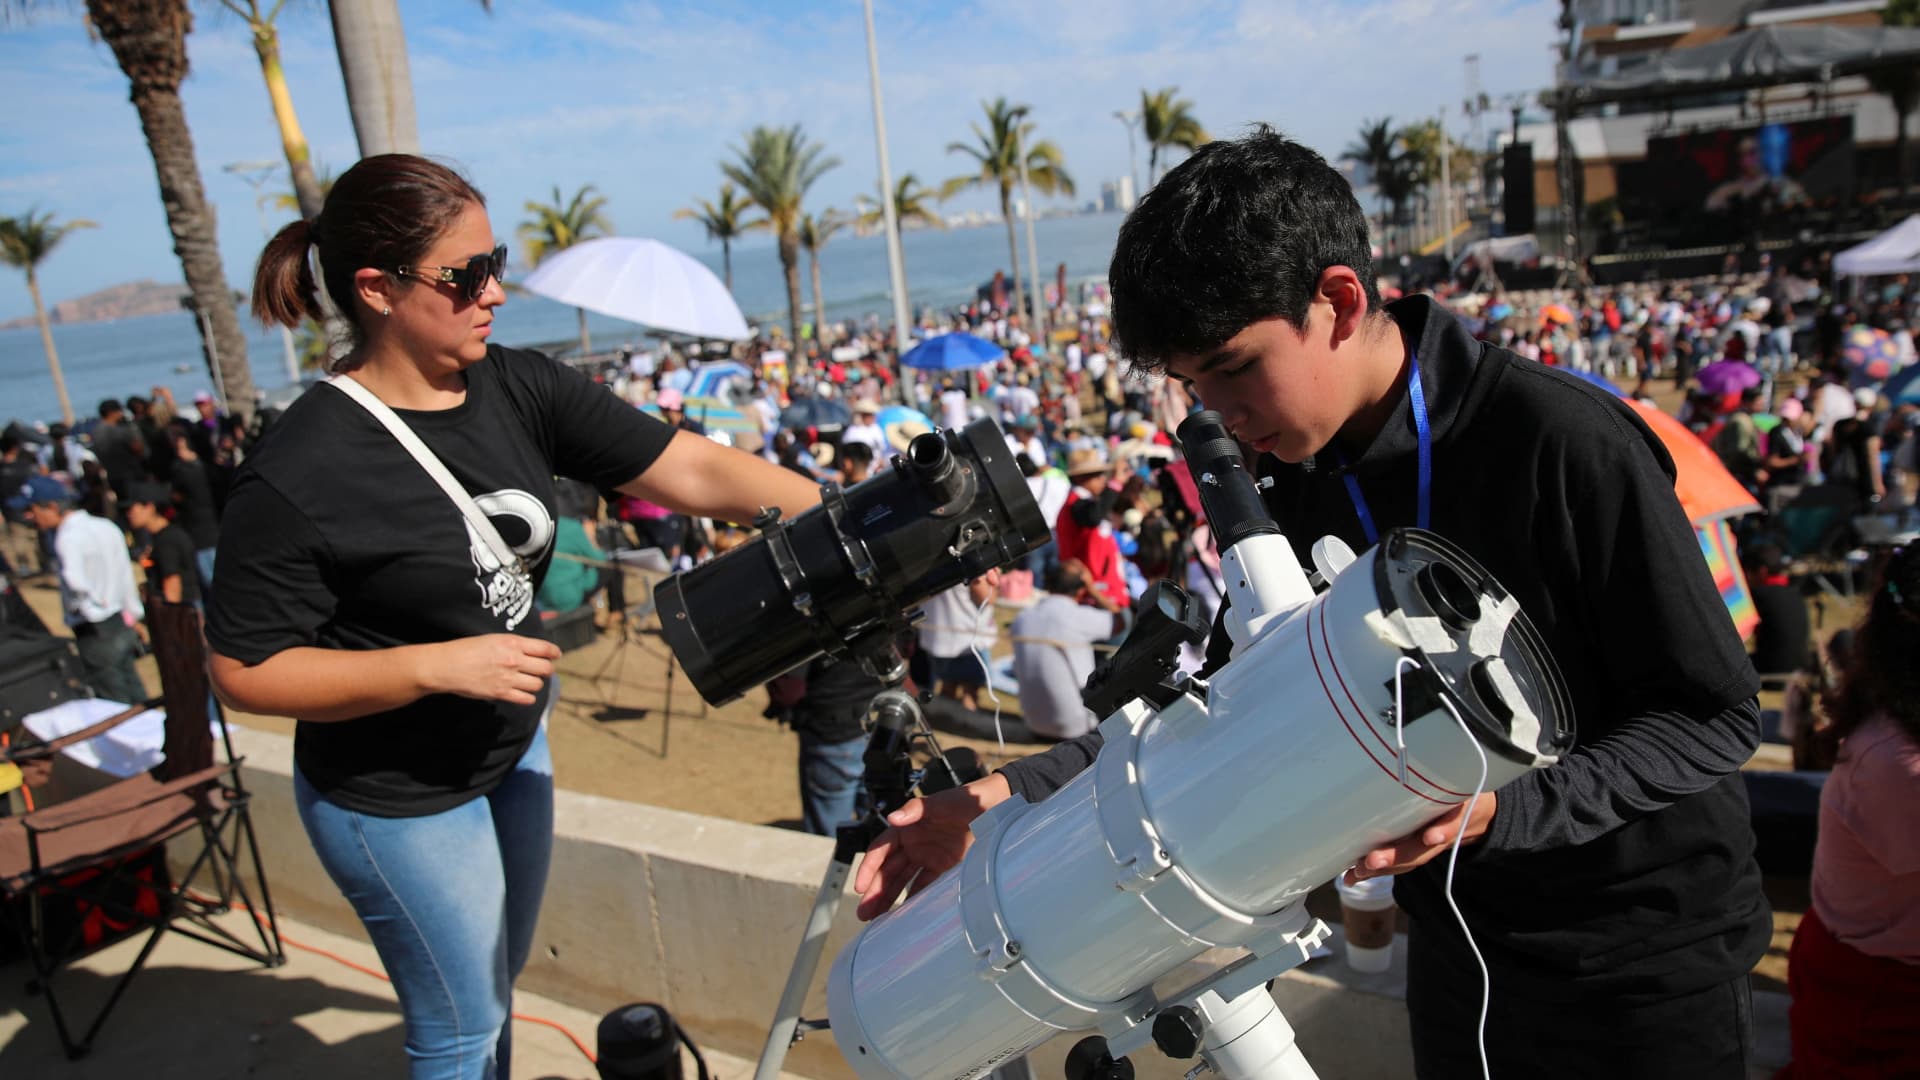 A youngster and a woman prepare their telescopes as people gather and wait to observe a total solar eclipse in Mazatlan, Mexico April 8, 2024.